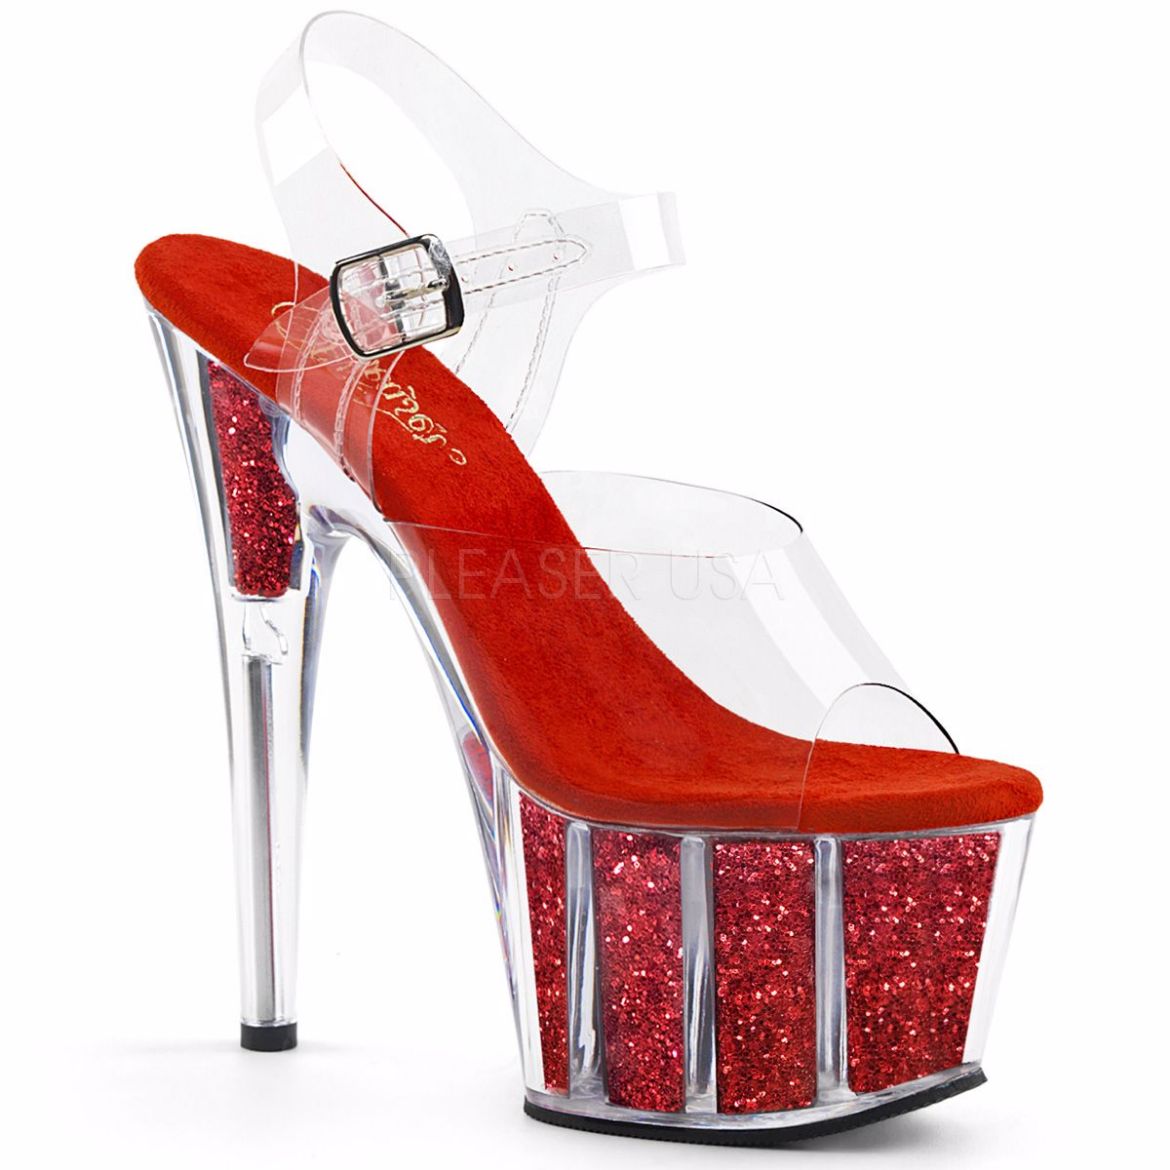 Product image of Pleaser Adore-708G Clear/Red Glitter Inserts, 7 inch (17.8 cm) Heel, 2 3/4 inch (7 cm) Platform Sandal Shoes